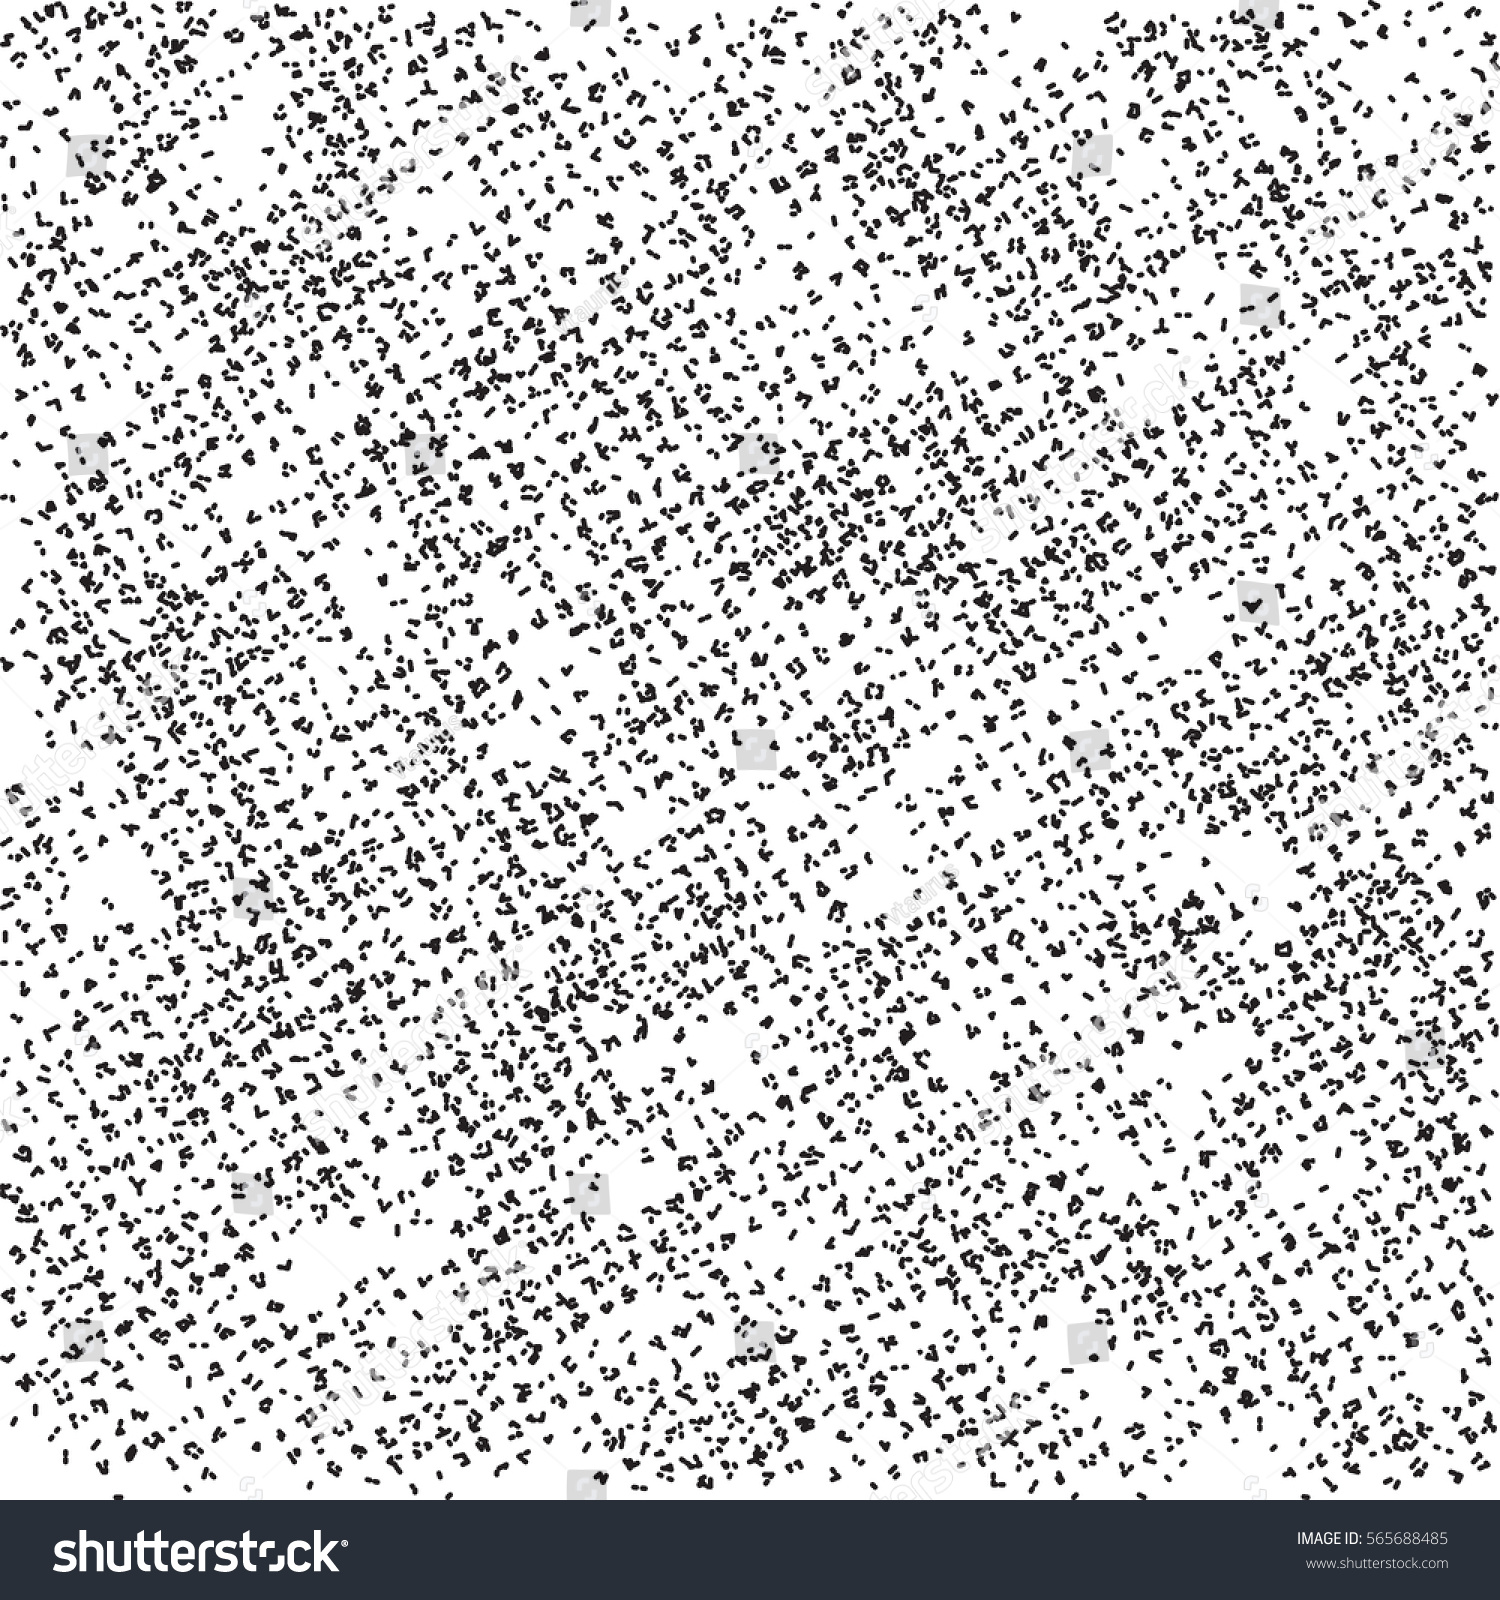 Grunge Texture Black White Spotted Background Stock Vector (2018 ...